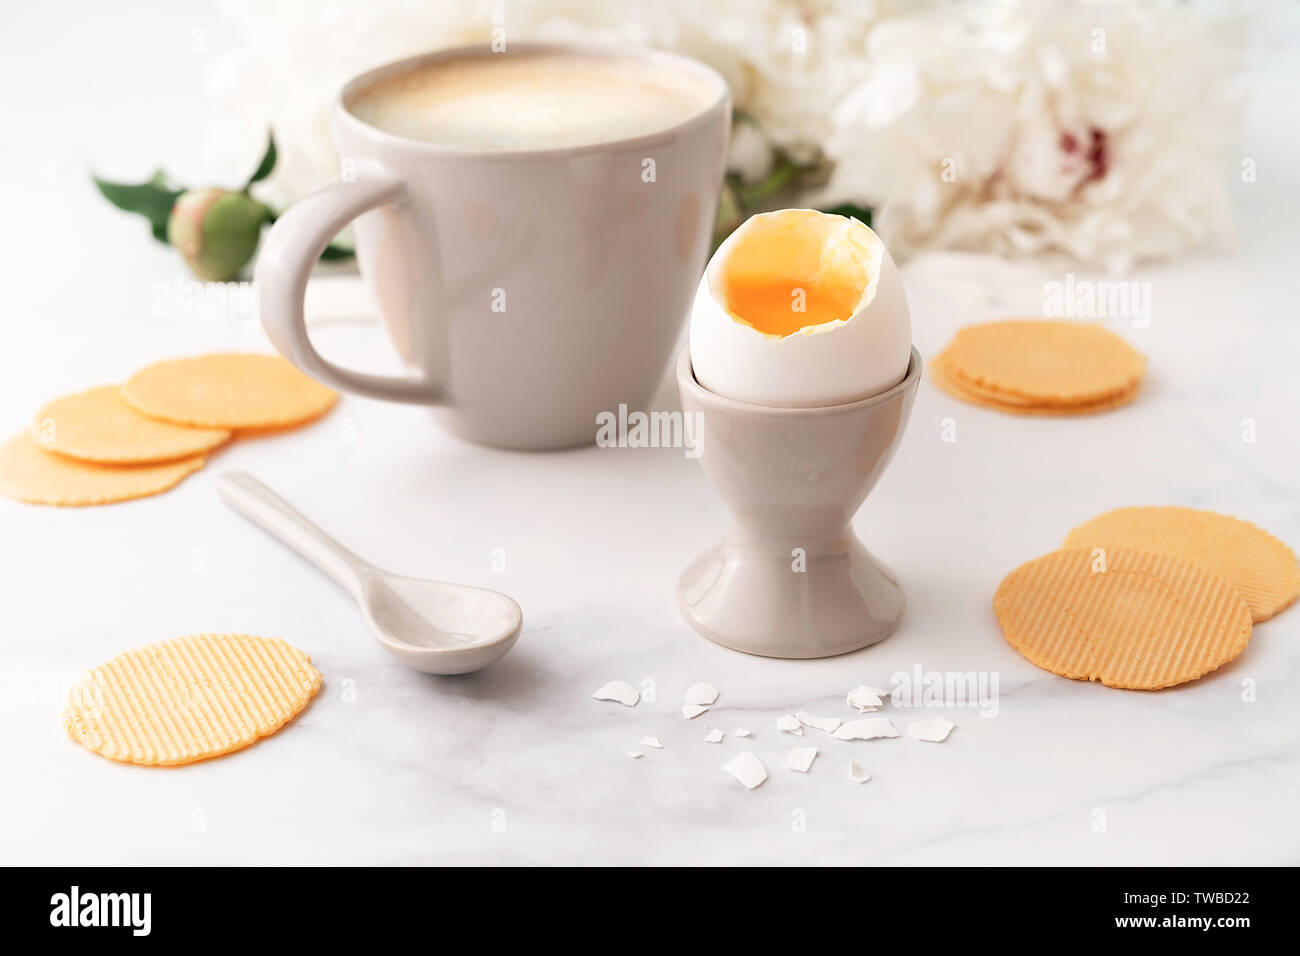 https://c8.alamy.com/comp/TWBD22/soft-boiled-egg-with-liquide-orange-yolk-in-ceramic-egg-cup-cup-of-coffee-with-ceramic-spoon-and-thin-crispy-corn-chips-on-background-of-beautiful-wh-TWBD22.jpg